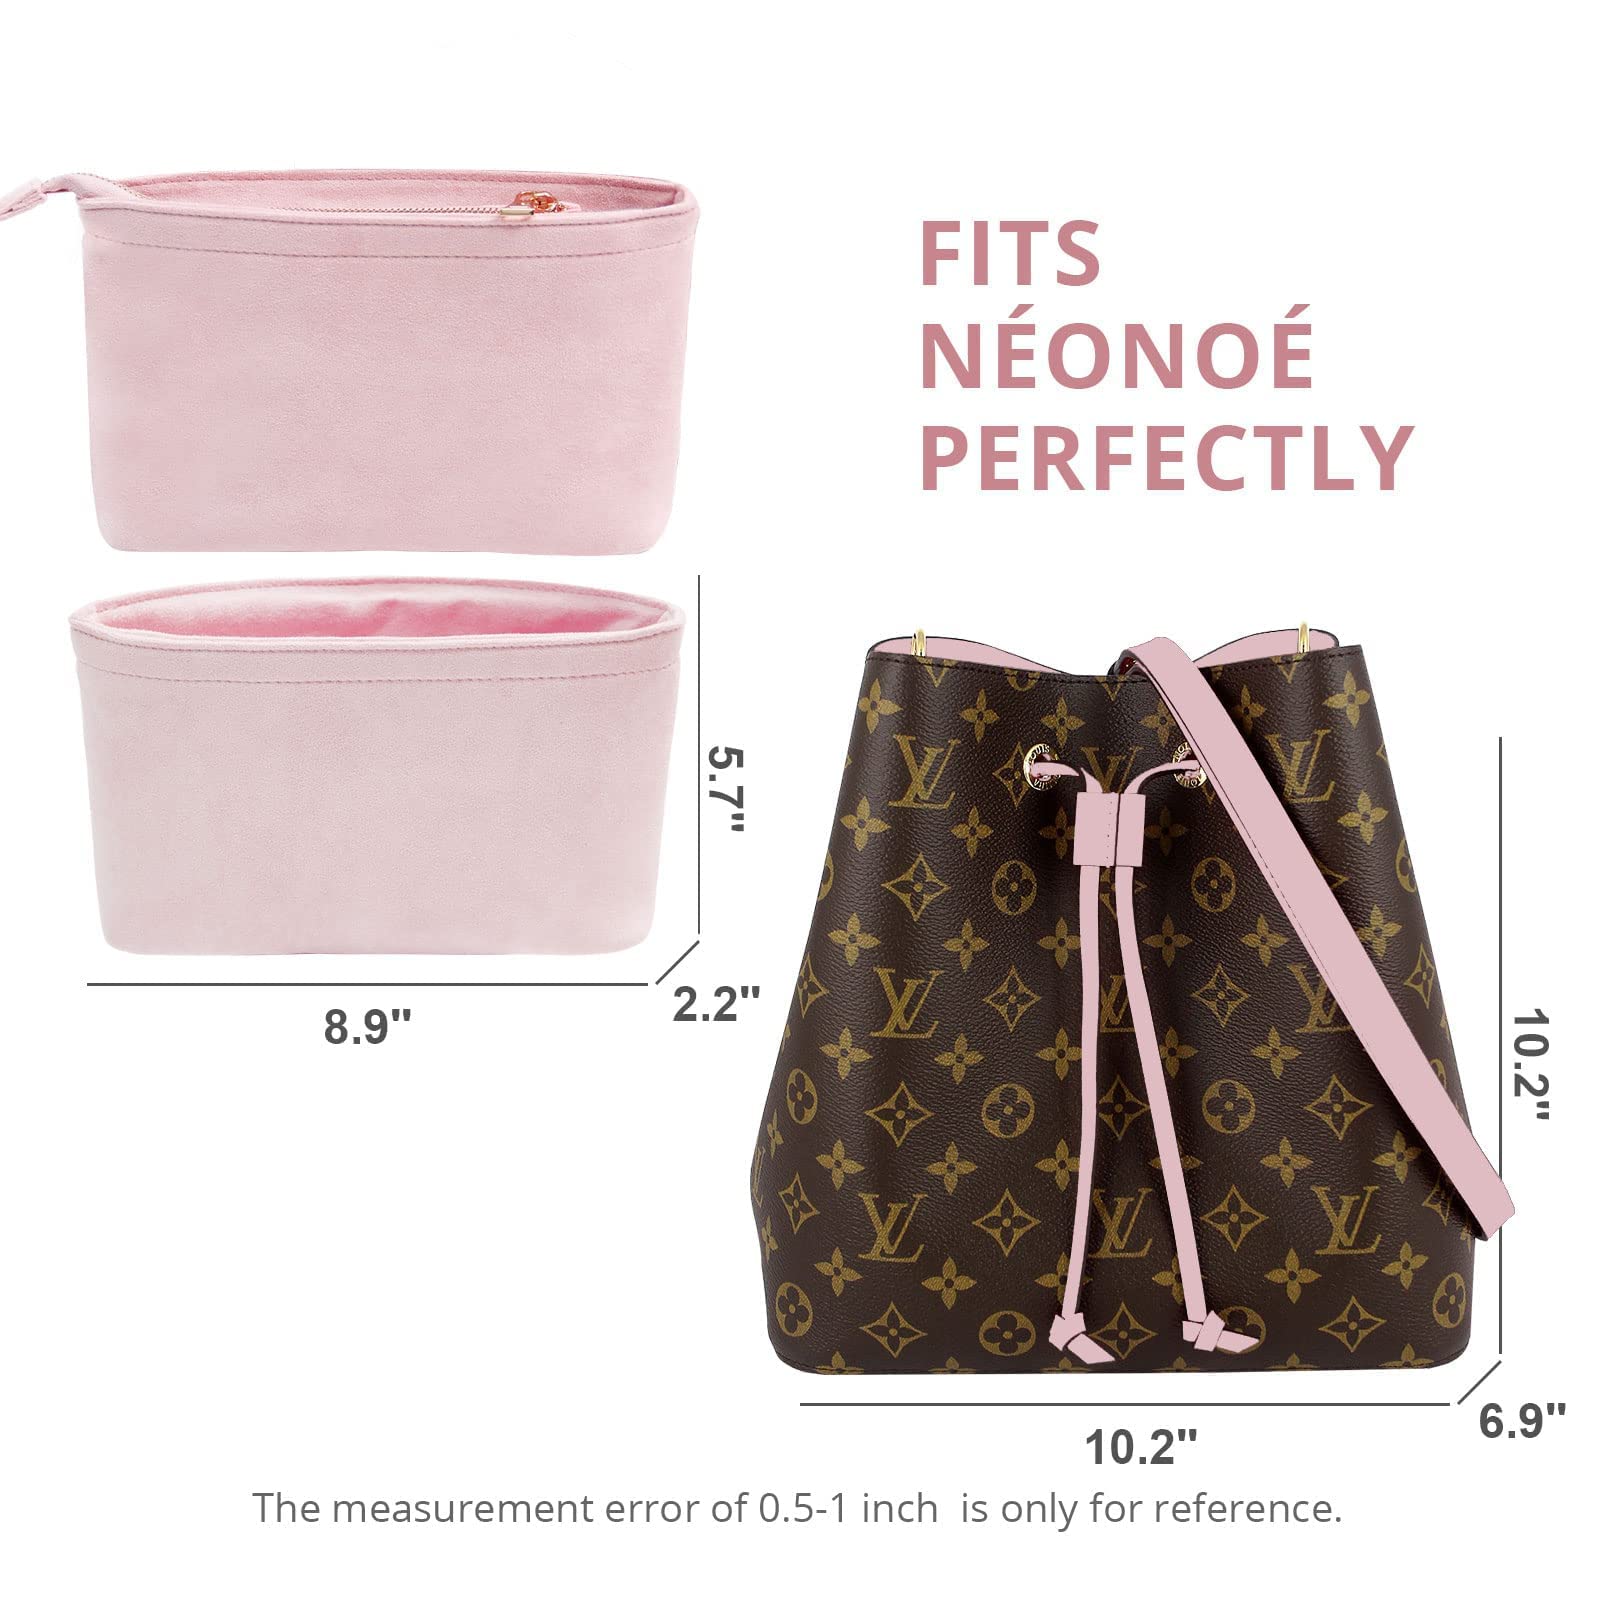 What Fits Inside The Louis Vuitton Neo Noe Should You Get It? Full